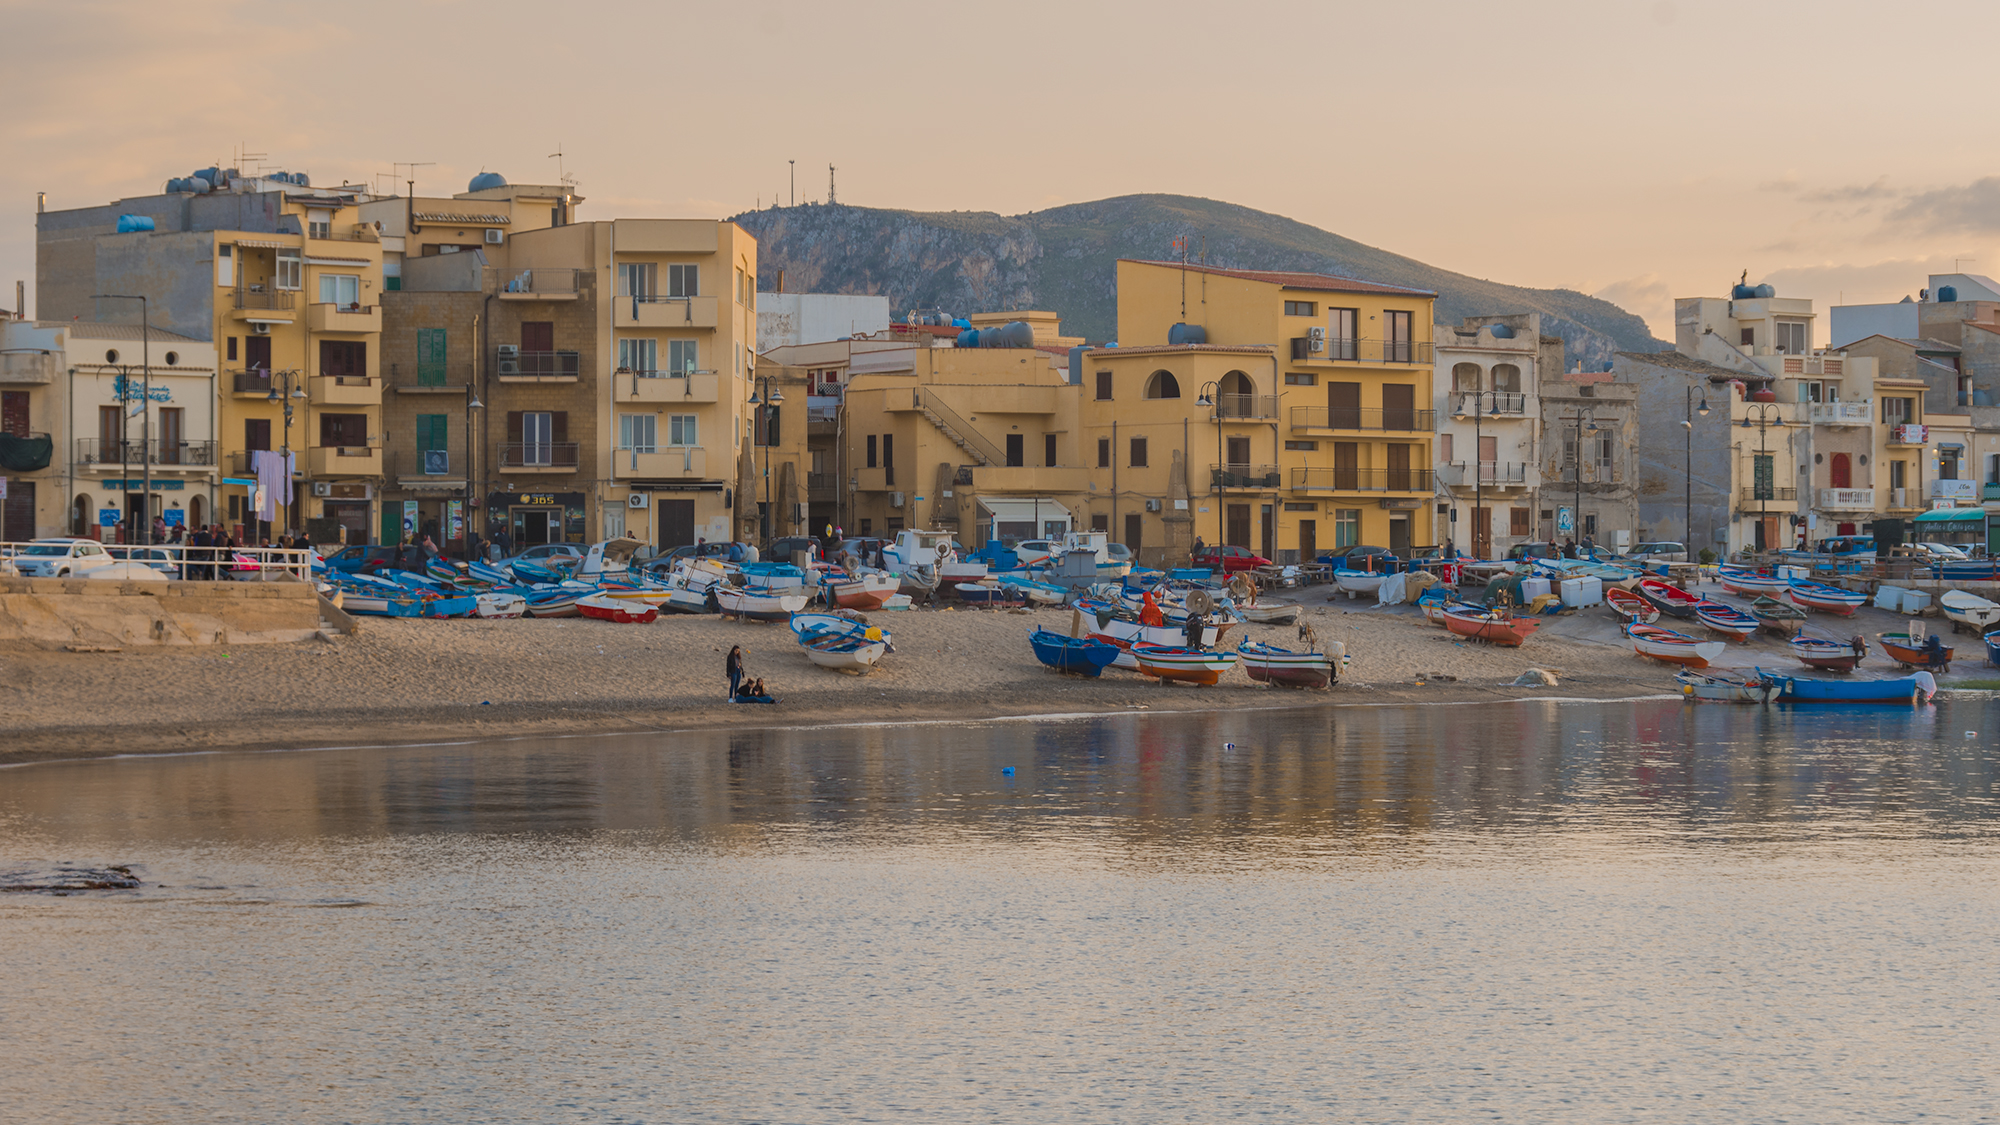 View of the aspra waterfront, Bagheria...